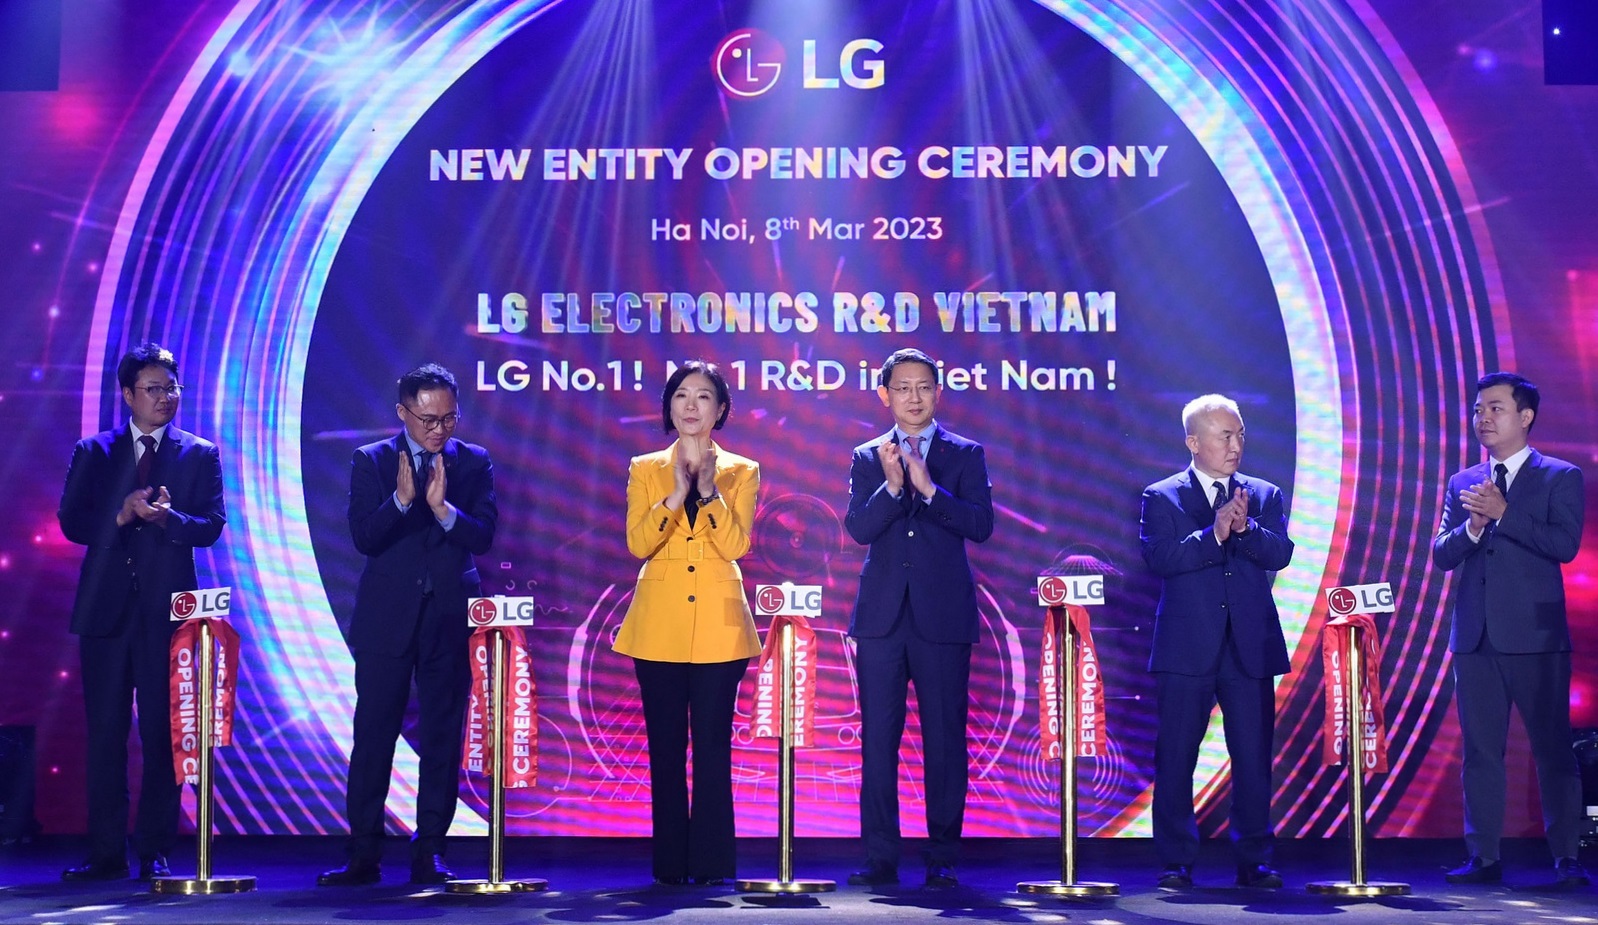 LG Executives, Vietnam government officials and others at the opening ceremony of LG R&D Subsidiary in Vietnam